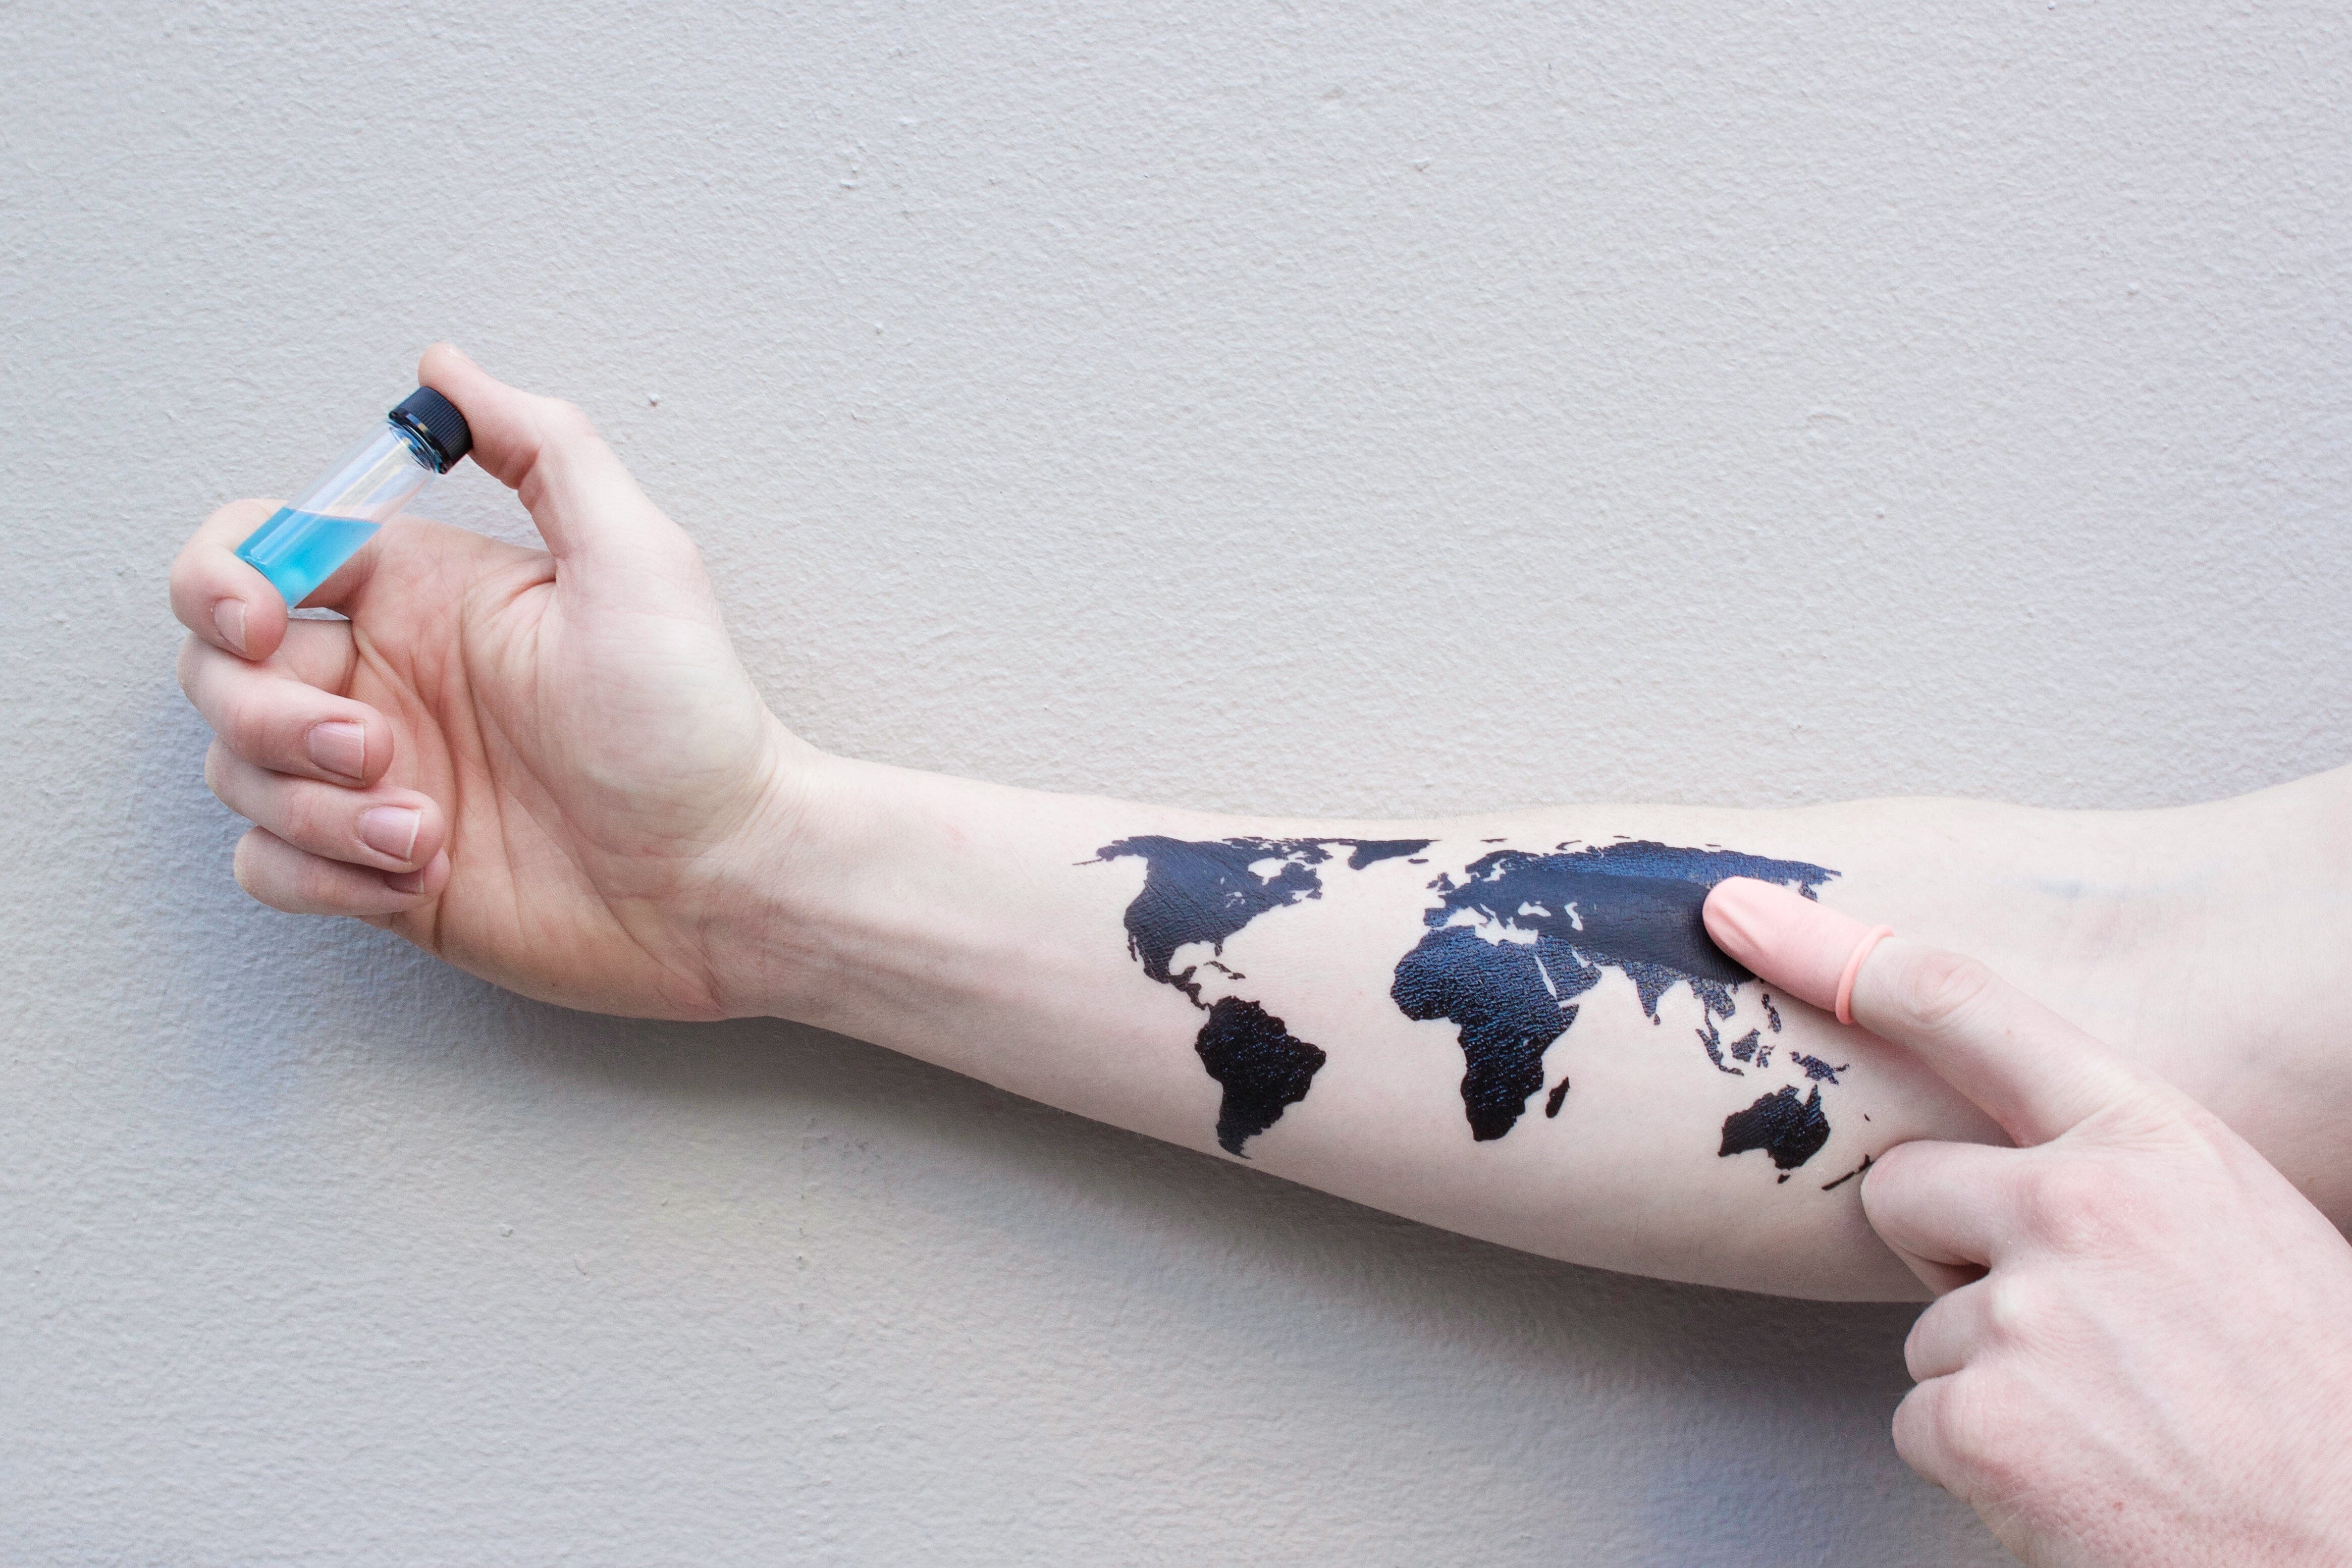 How to make realistic temporary tattoos